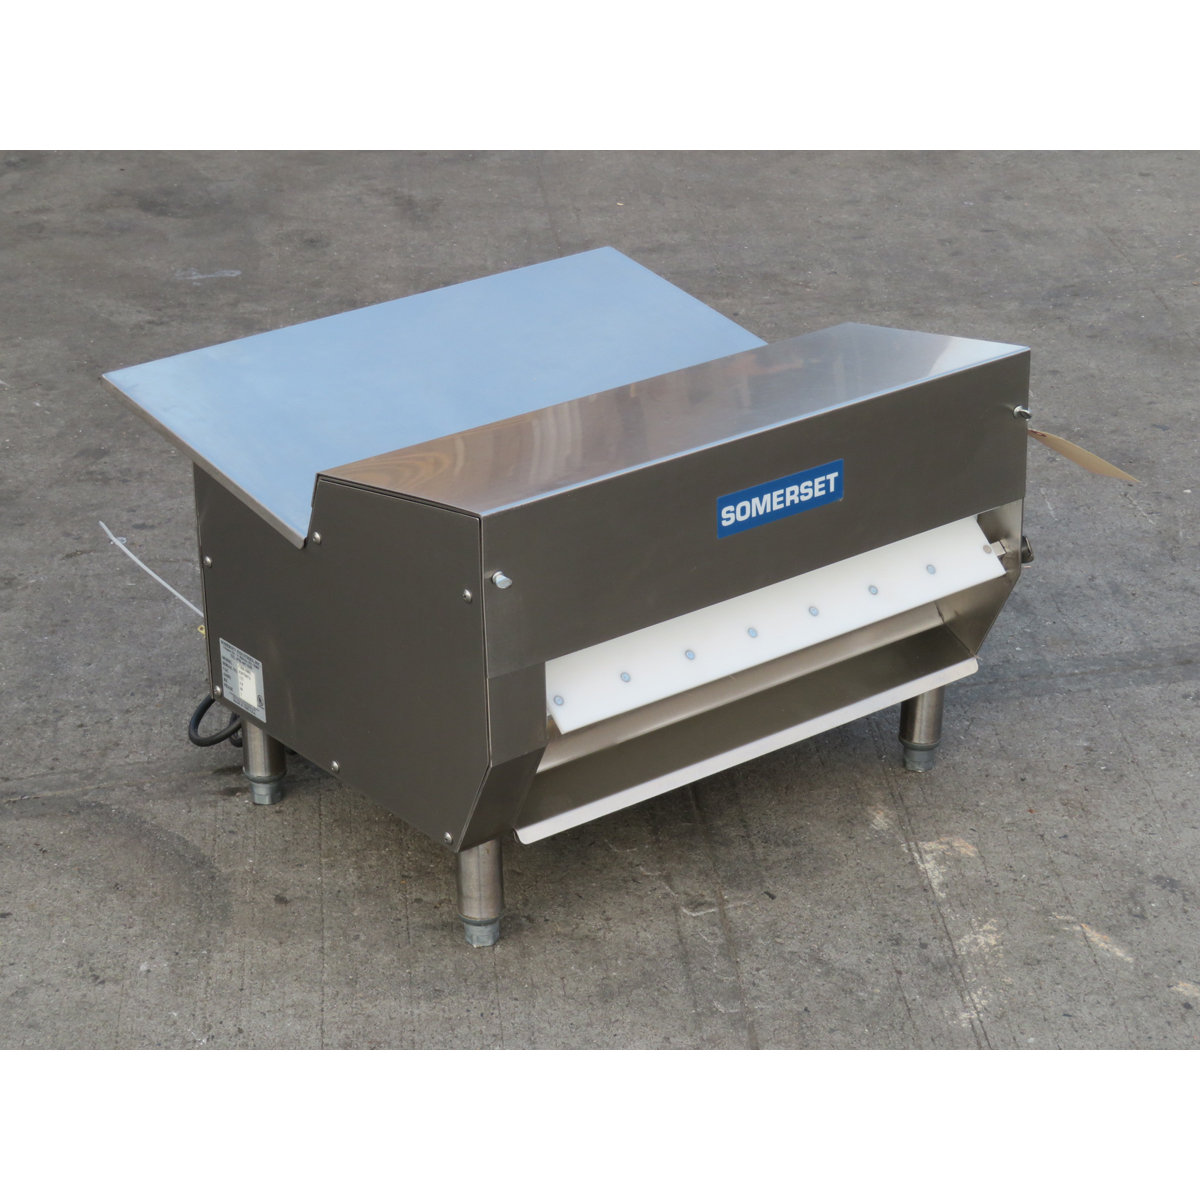 Somerset CDR-500S Dough Sheeter, Used Excellent Condition